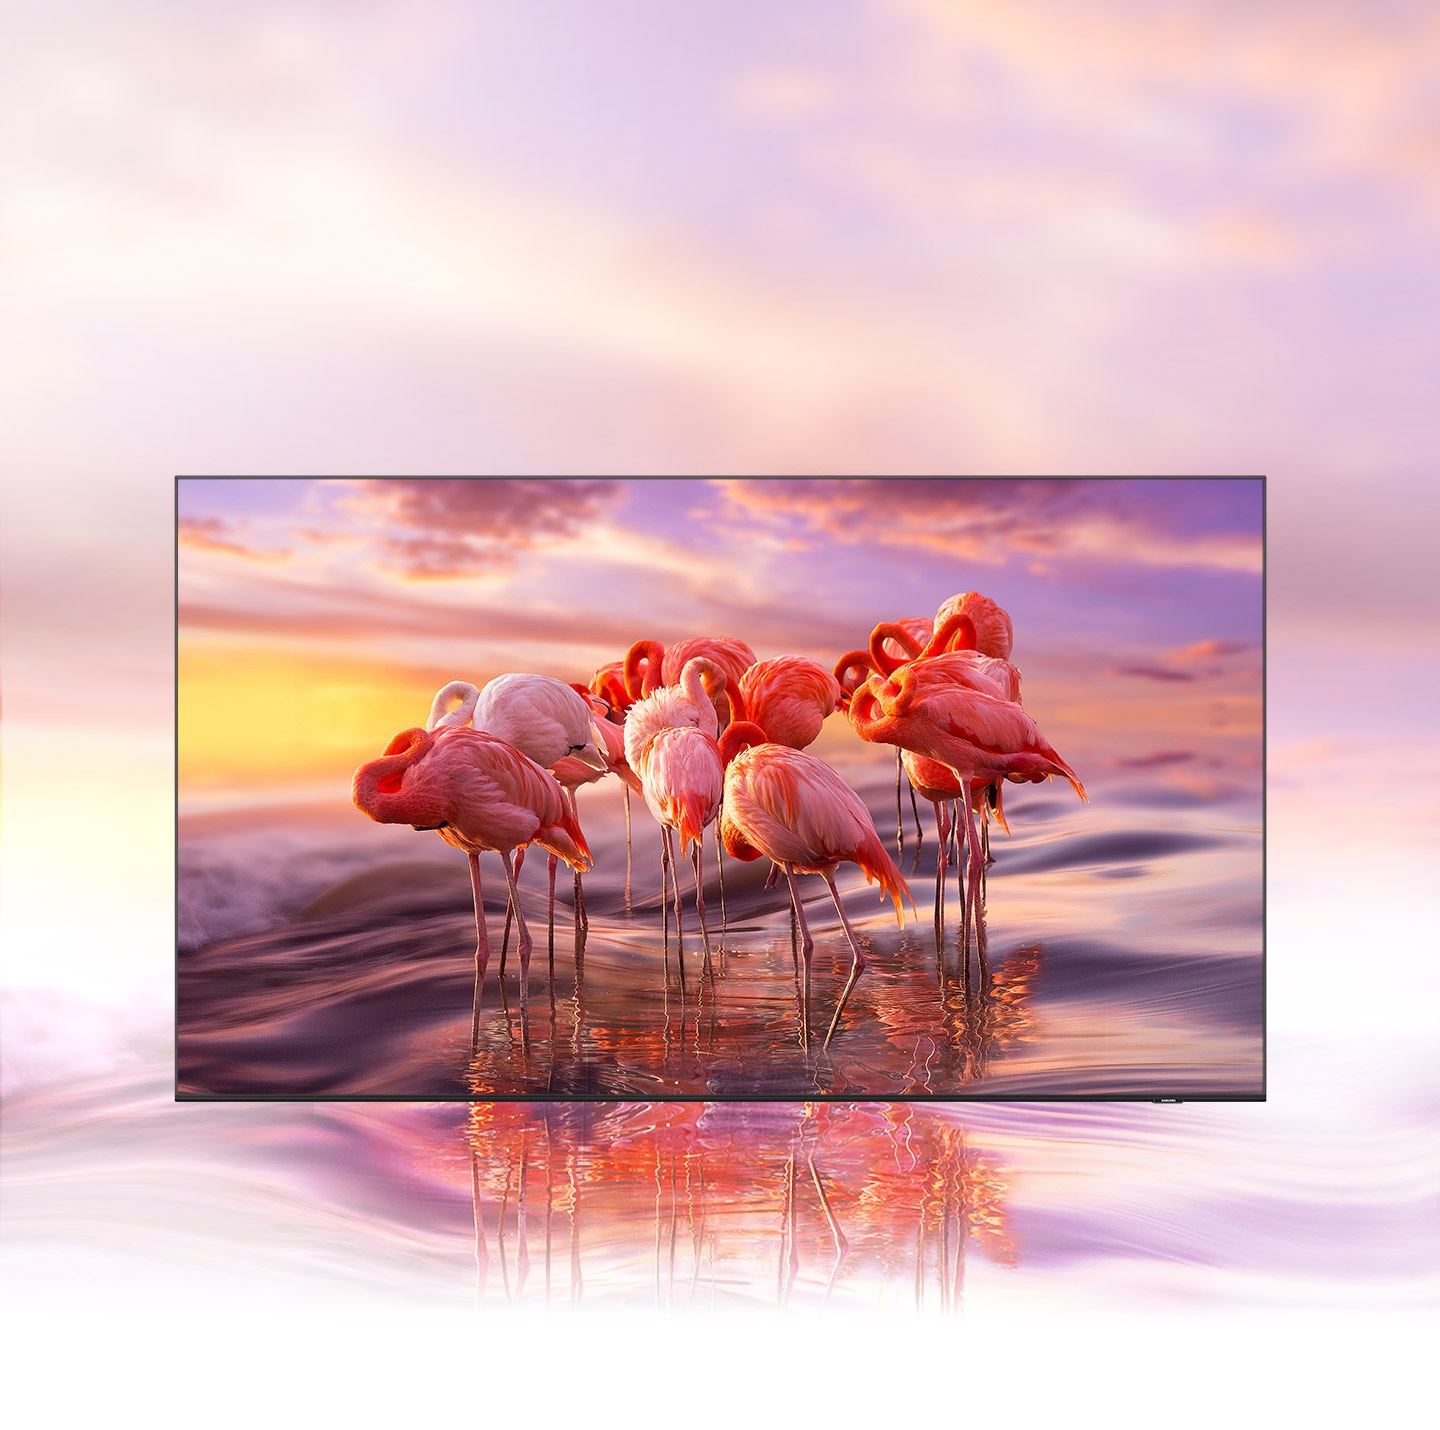 QLED TV displays an intricately coloured image of flamingos to demonstrate colour shading brilliance of Quantum Dot technology.